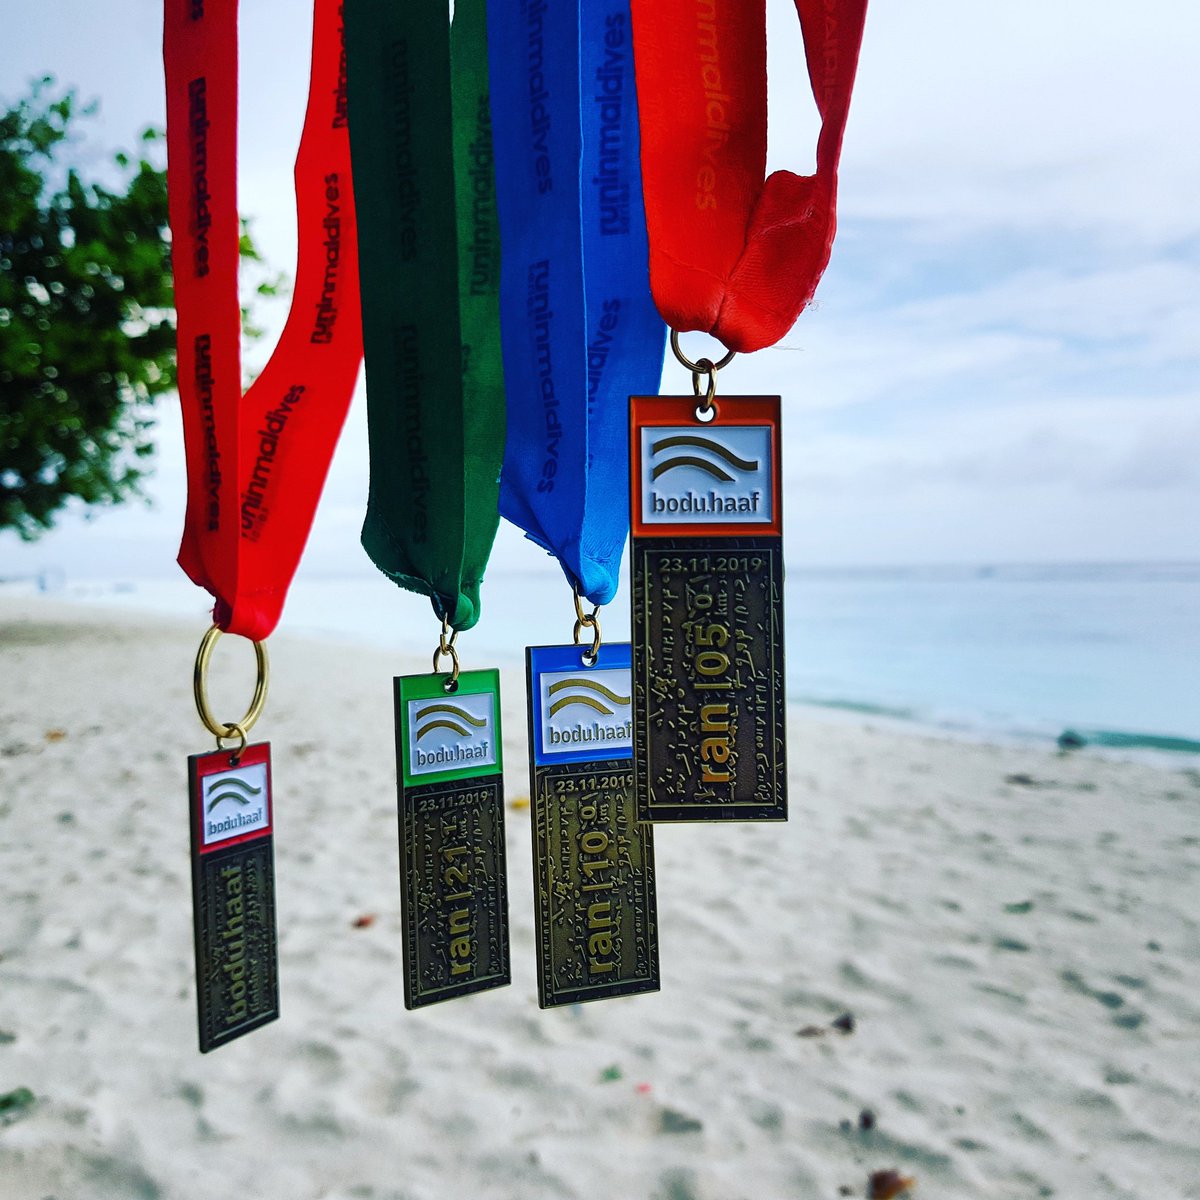 Challenge the body. Challenge the mind. And when you win you get 4 medals. #medalmania #boduhaaf #5km #10km #halfmarathon #Smilingfromthiver 🏃‍♂️🏃‍♂️🏃‍♂️